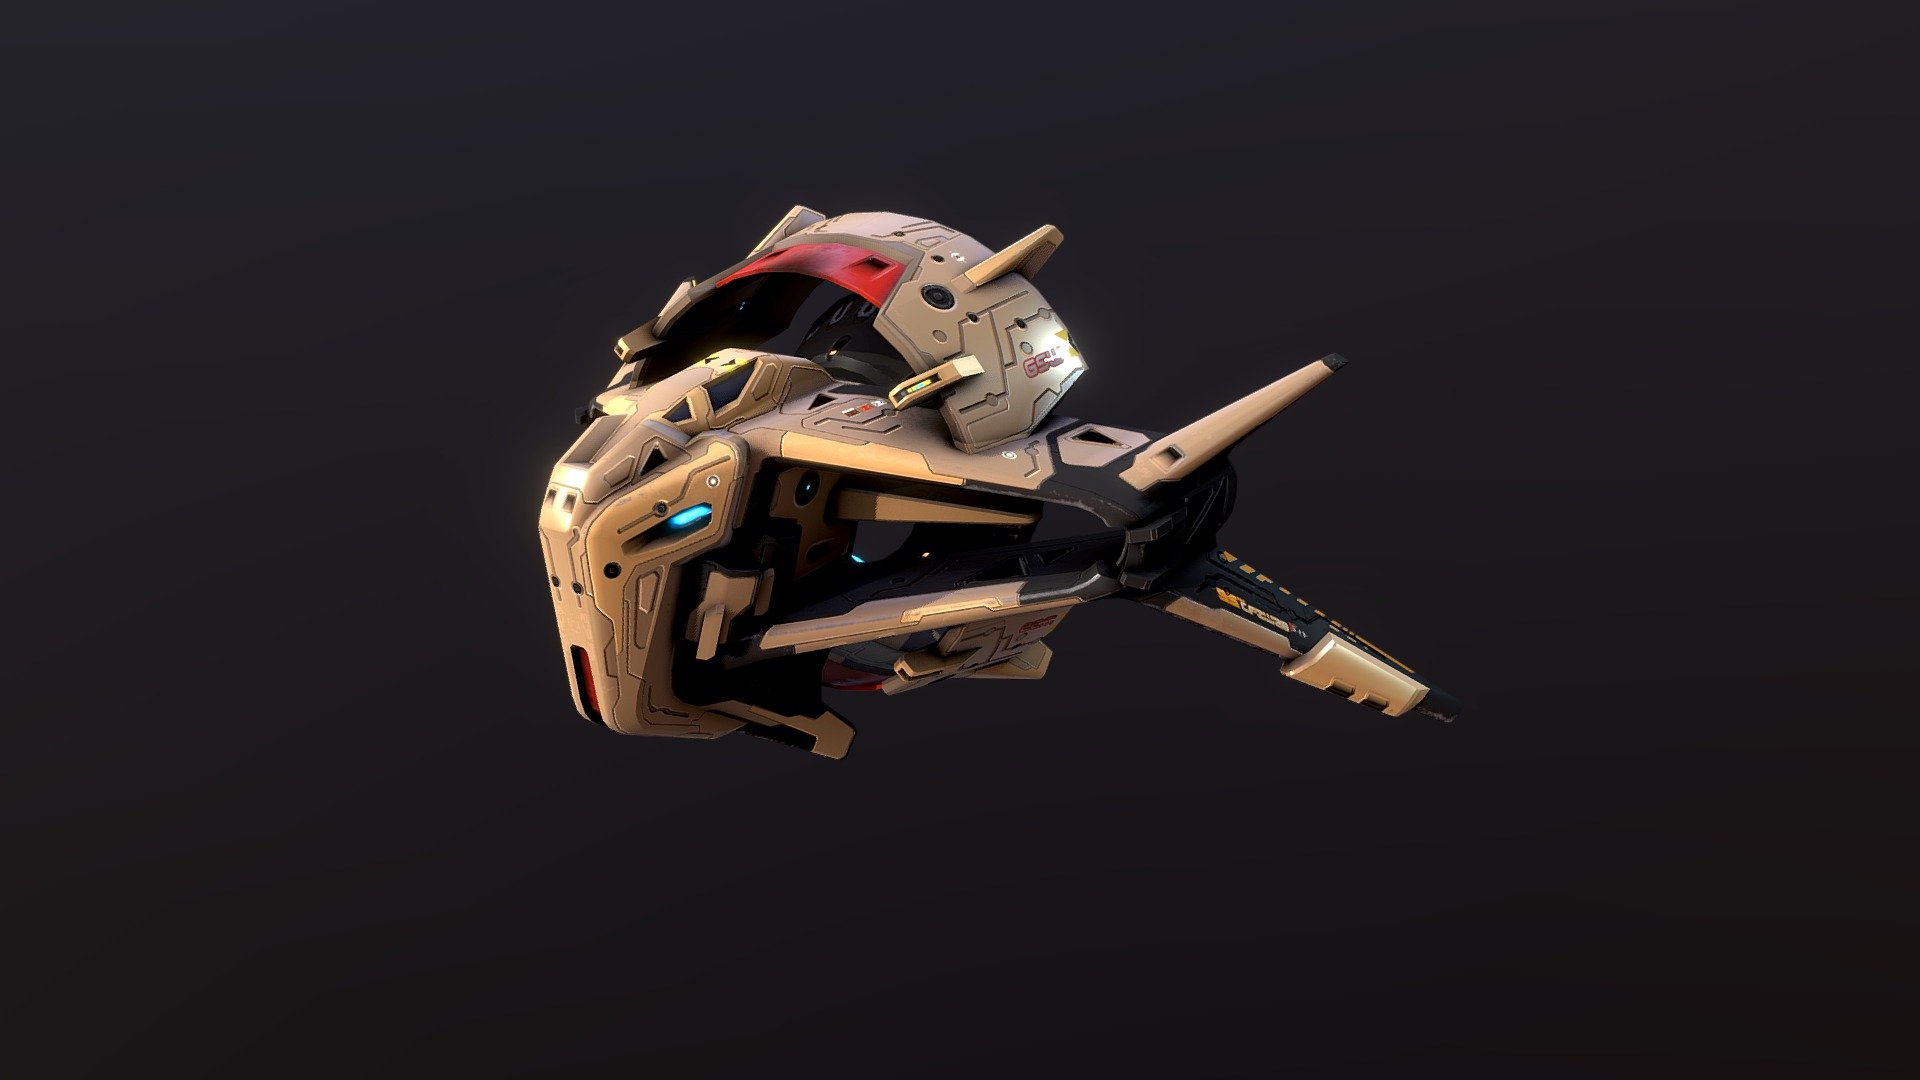 SF Bomber low-poly 3d model ready for Virtual Reality (VR), Augmented Reality (AR), games and other real-time apps.

Add a professional touch to your SciFi VideoGame project with this original low poly model. Set of one SciFi Spaceship 3d model